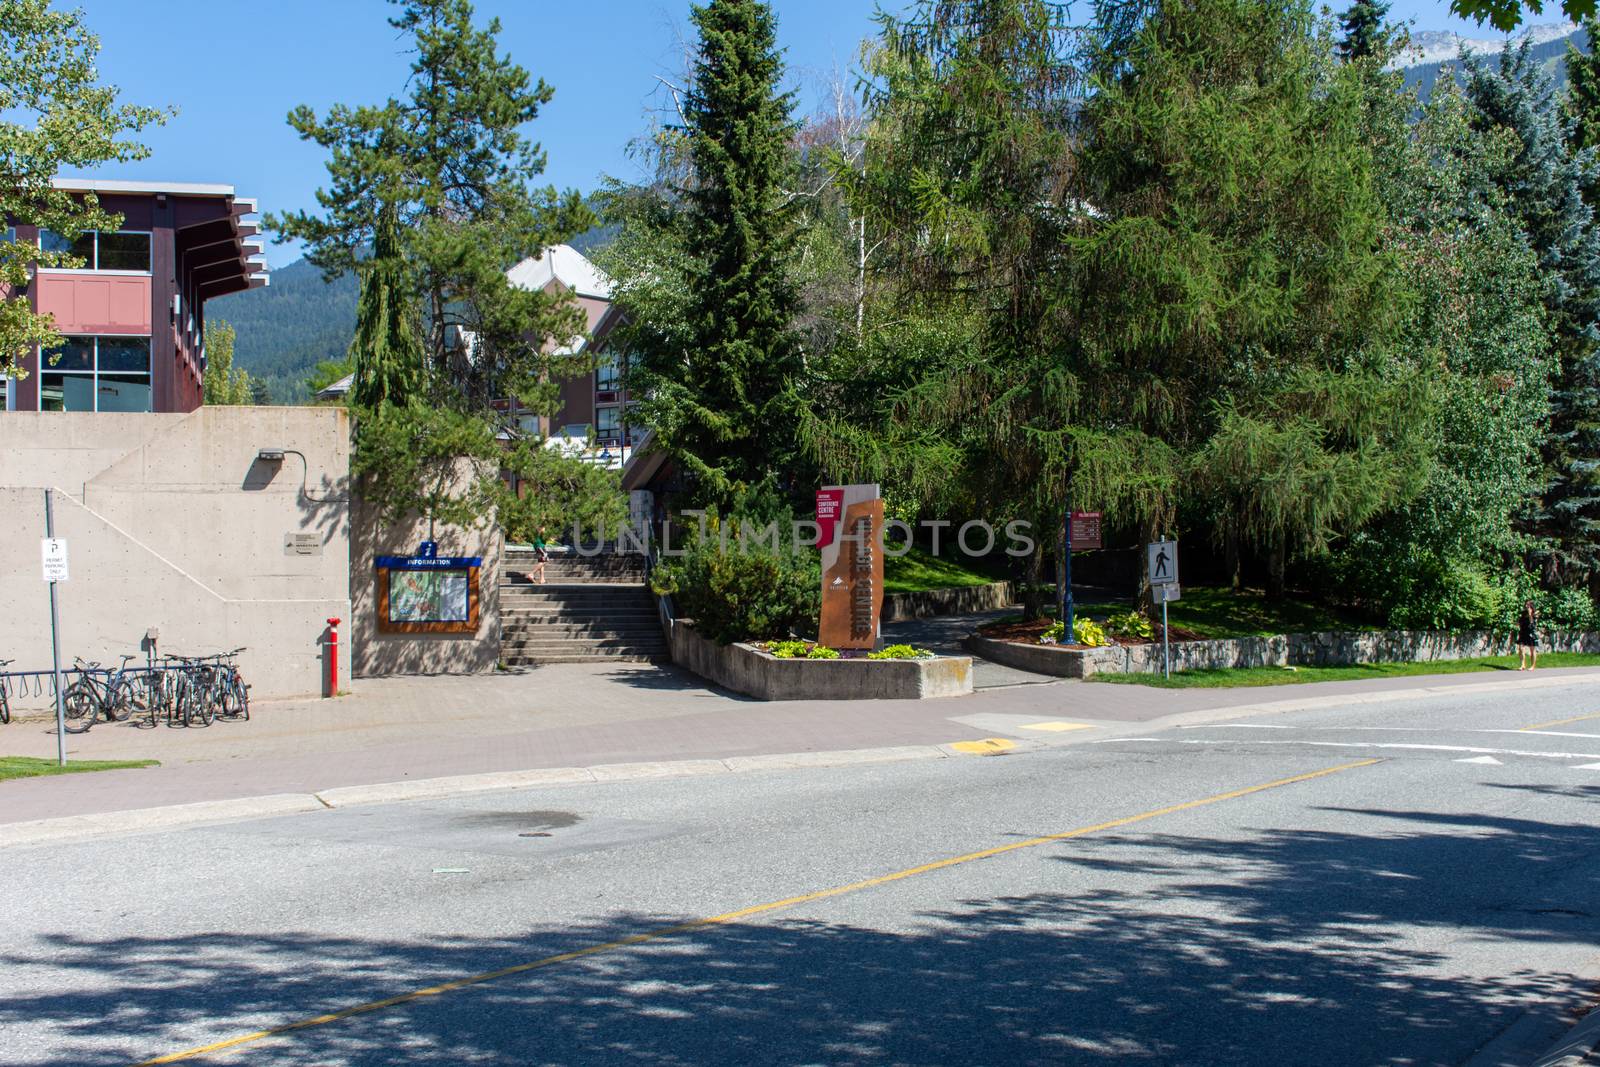 "Whistler, British Columbia/Canada - 08/07/2019: Whistler village streets during the summer looking at the walkway, street, shops and tourists enjoying this Olympic world class destination."